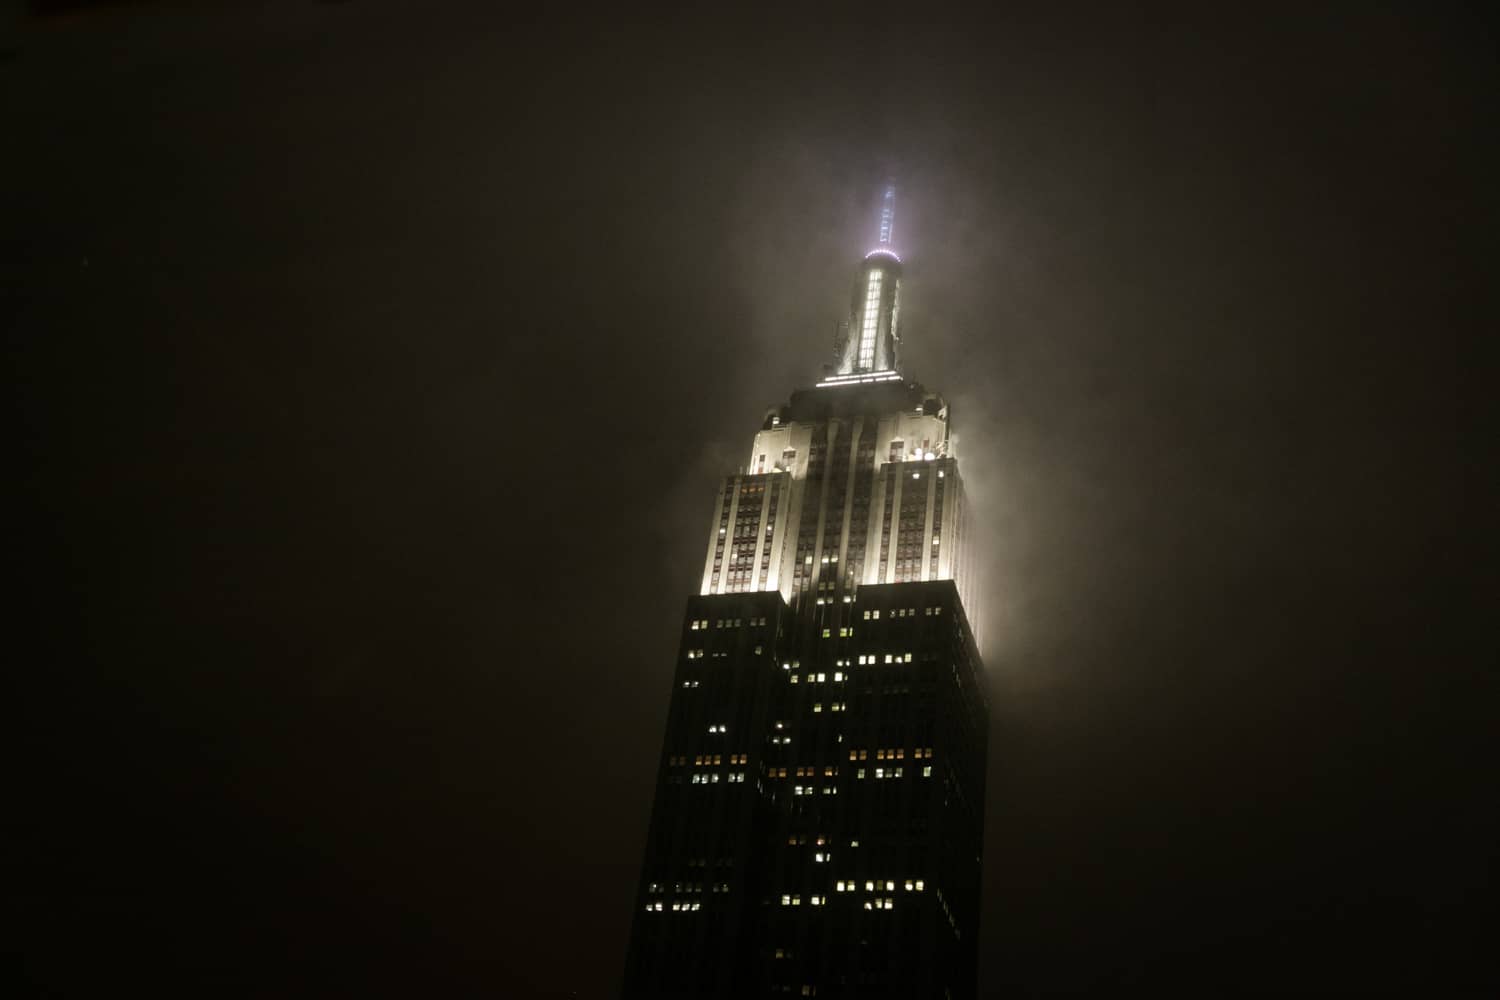 Top of the Empire State Building shrouded in fog at night